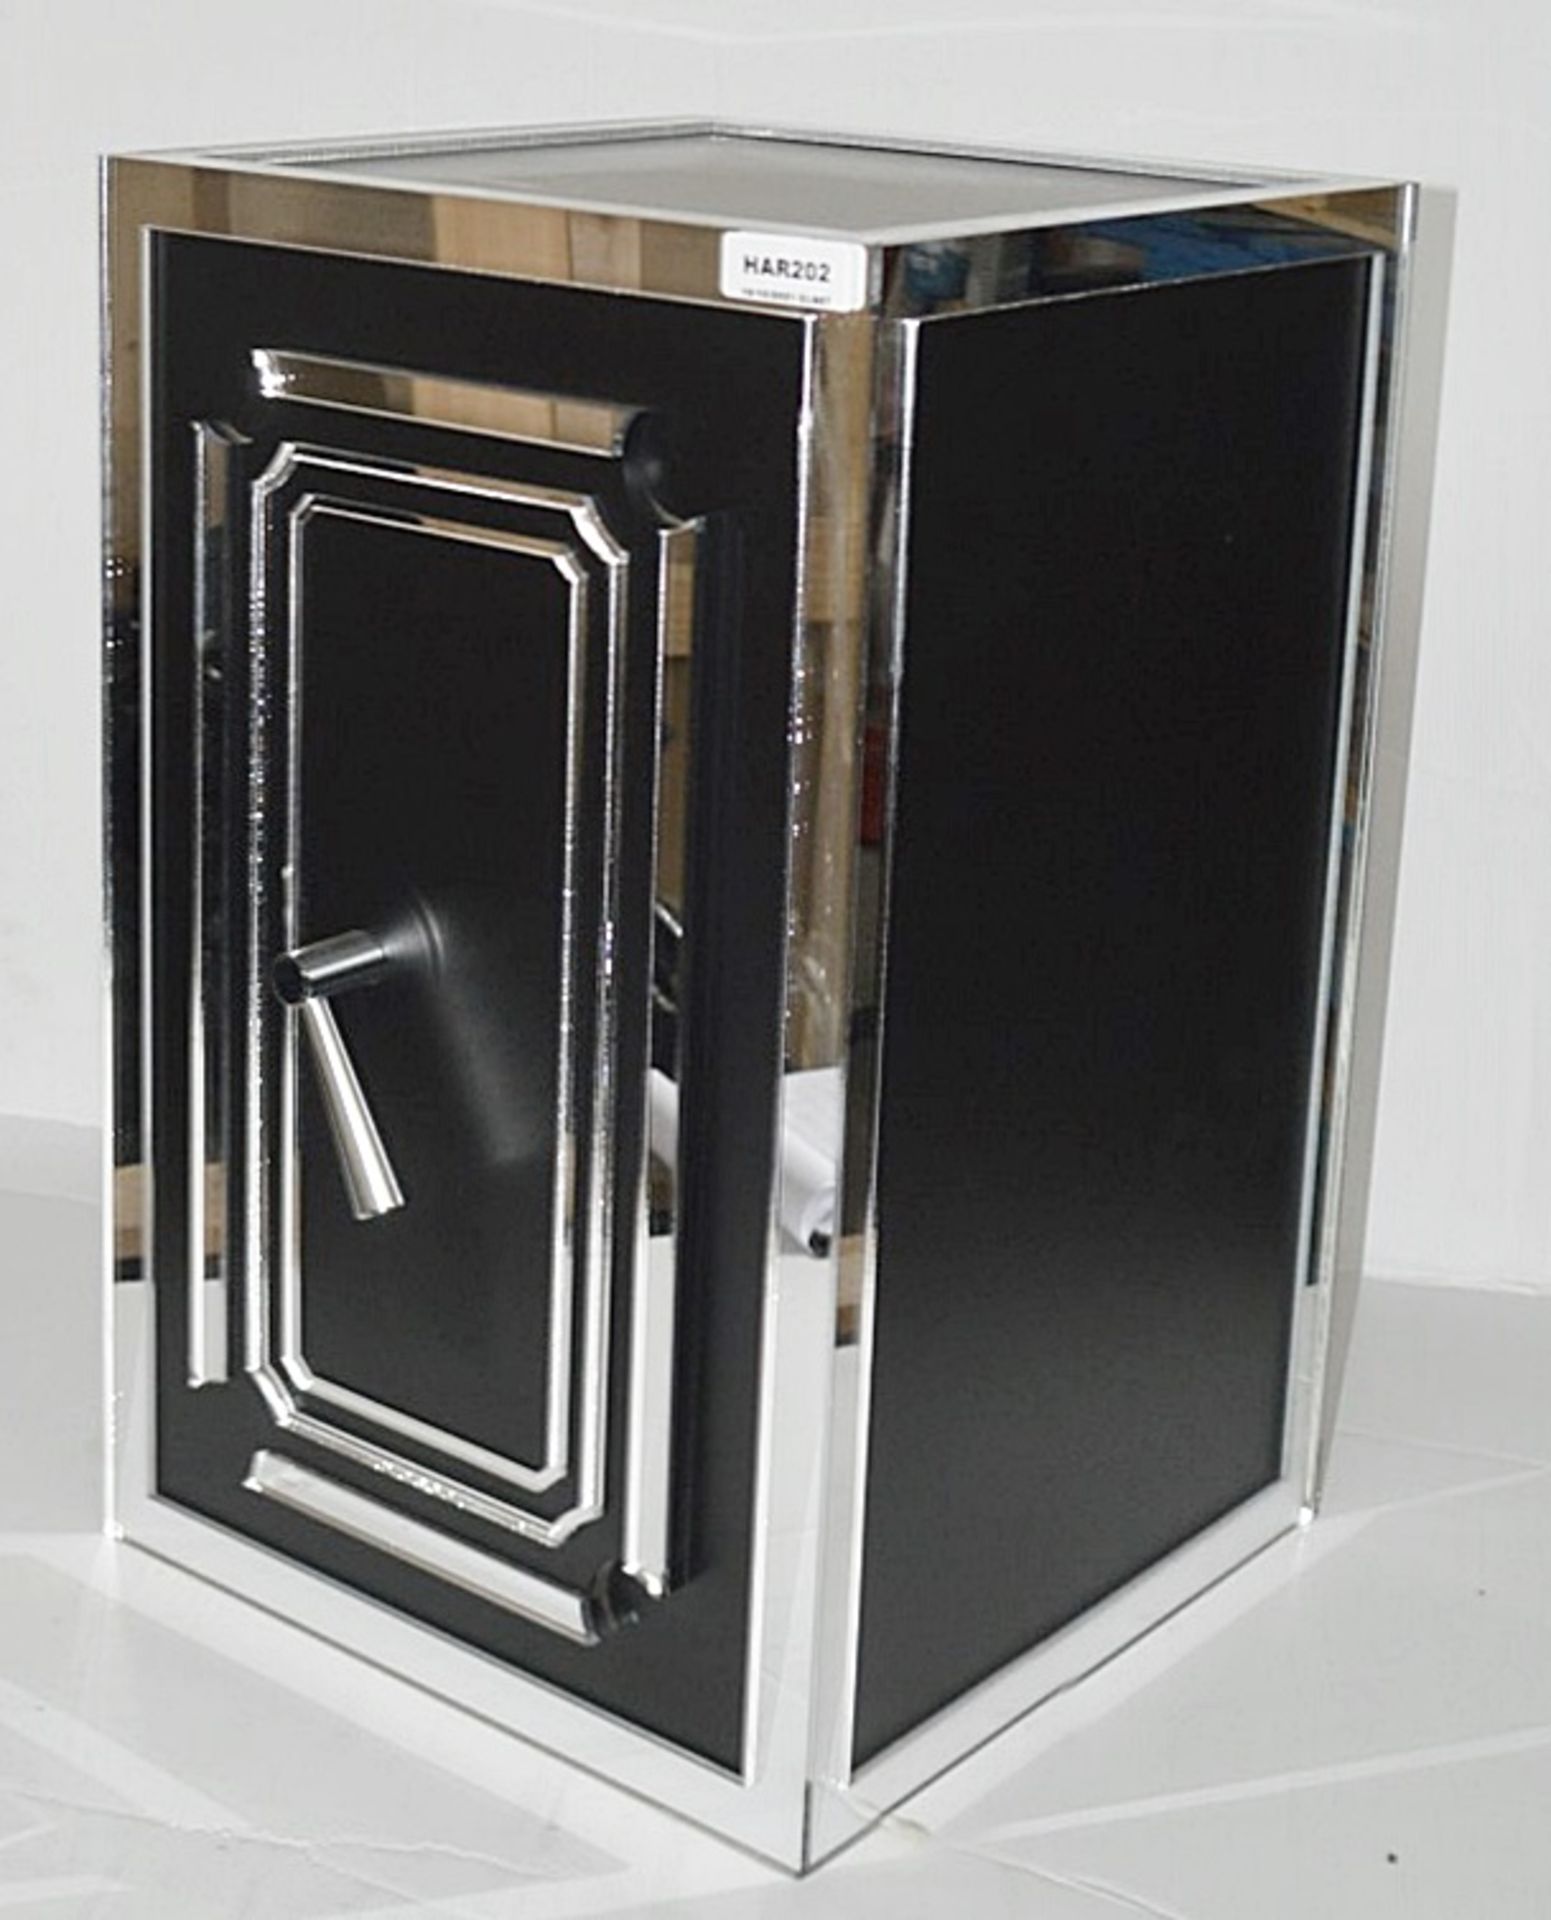 2 x Bank Vault Safe-style Shop Display Dumy Props In Black With Mirrored Decoration - Image 3 of 5